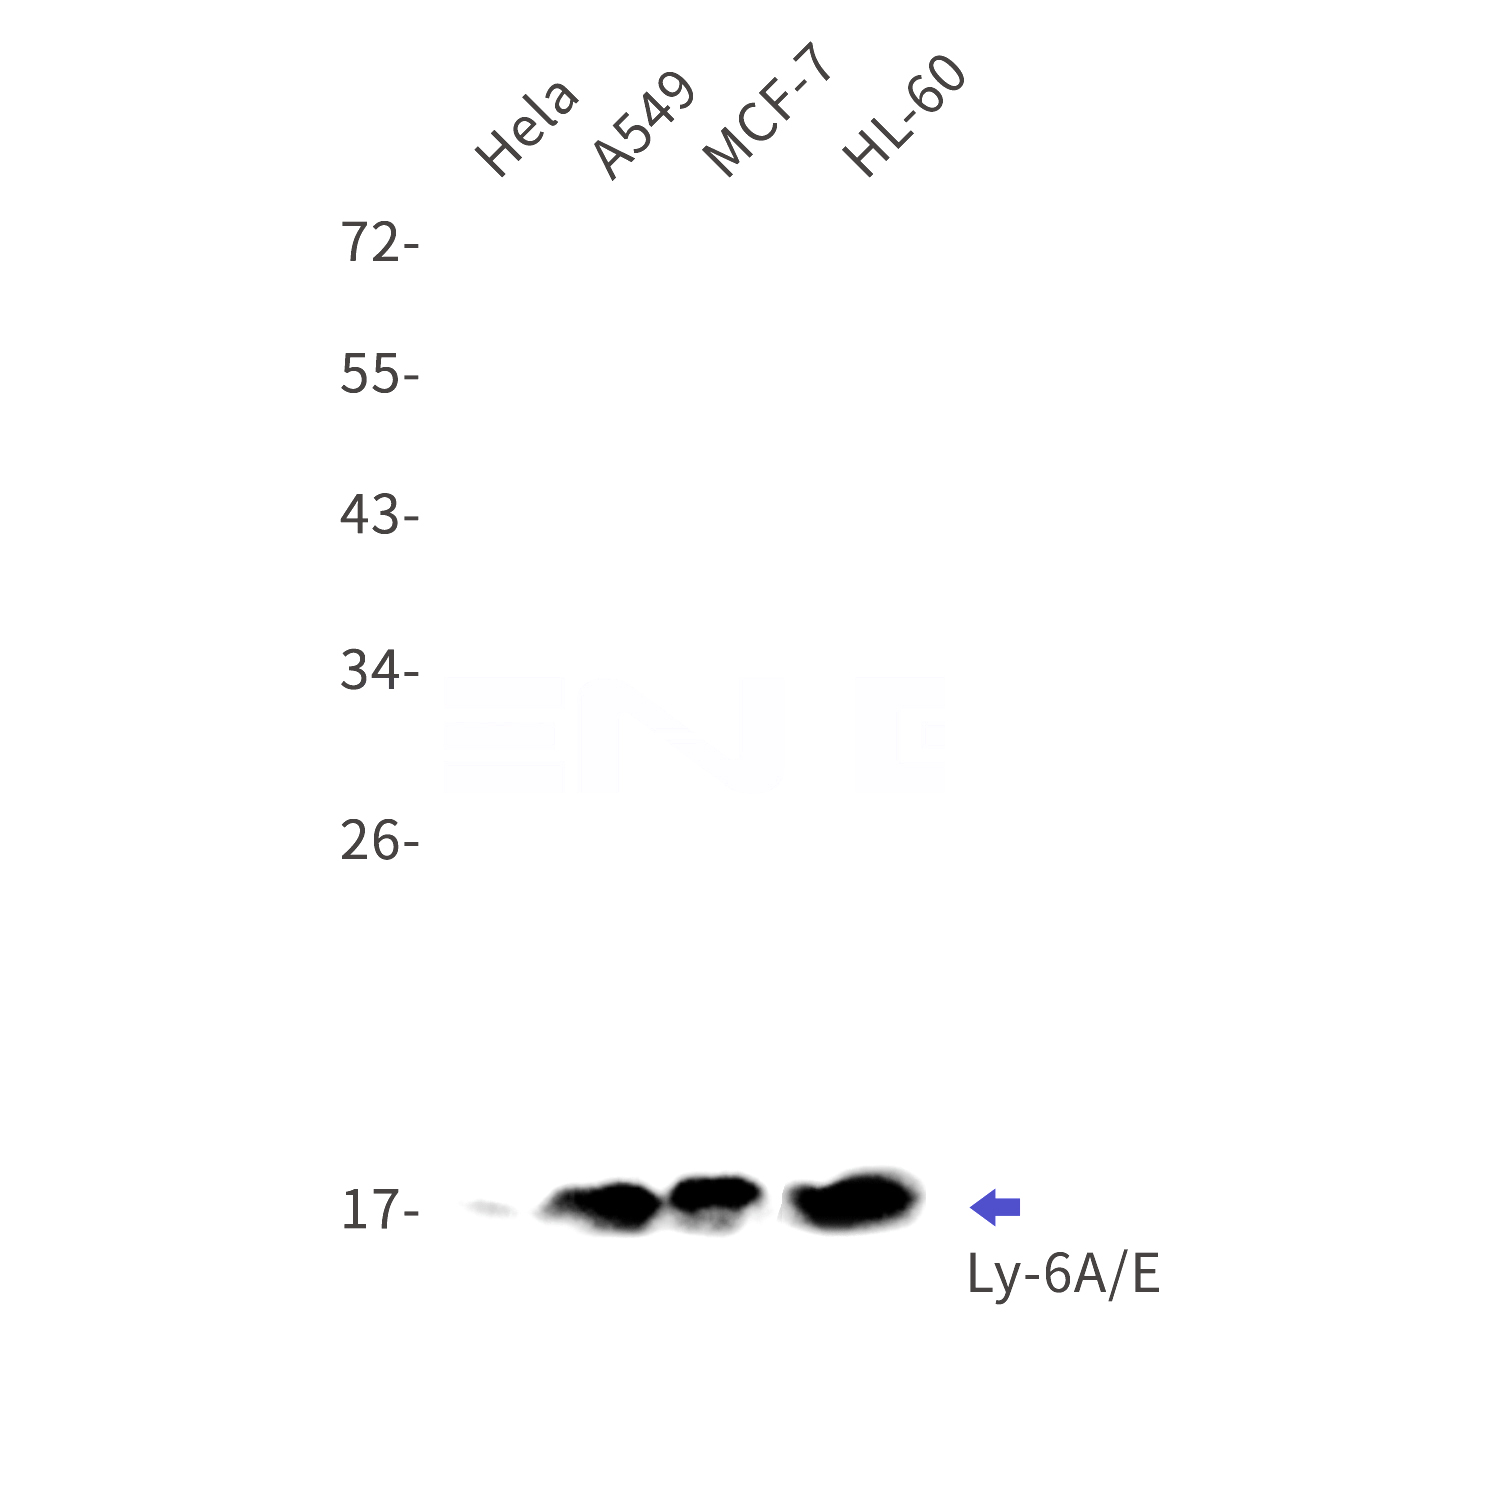 Western blot detection of Ly-6A/E in Hela,A549,MCF-7,HL-60 cell lysates using Ly-6A/E Rabbit mAb(1:1000 diluted).Predicted band size:14kDa.Observed band size:18kDa.